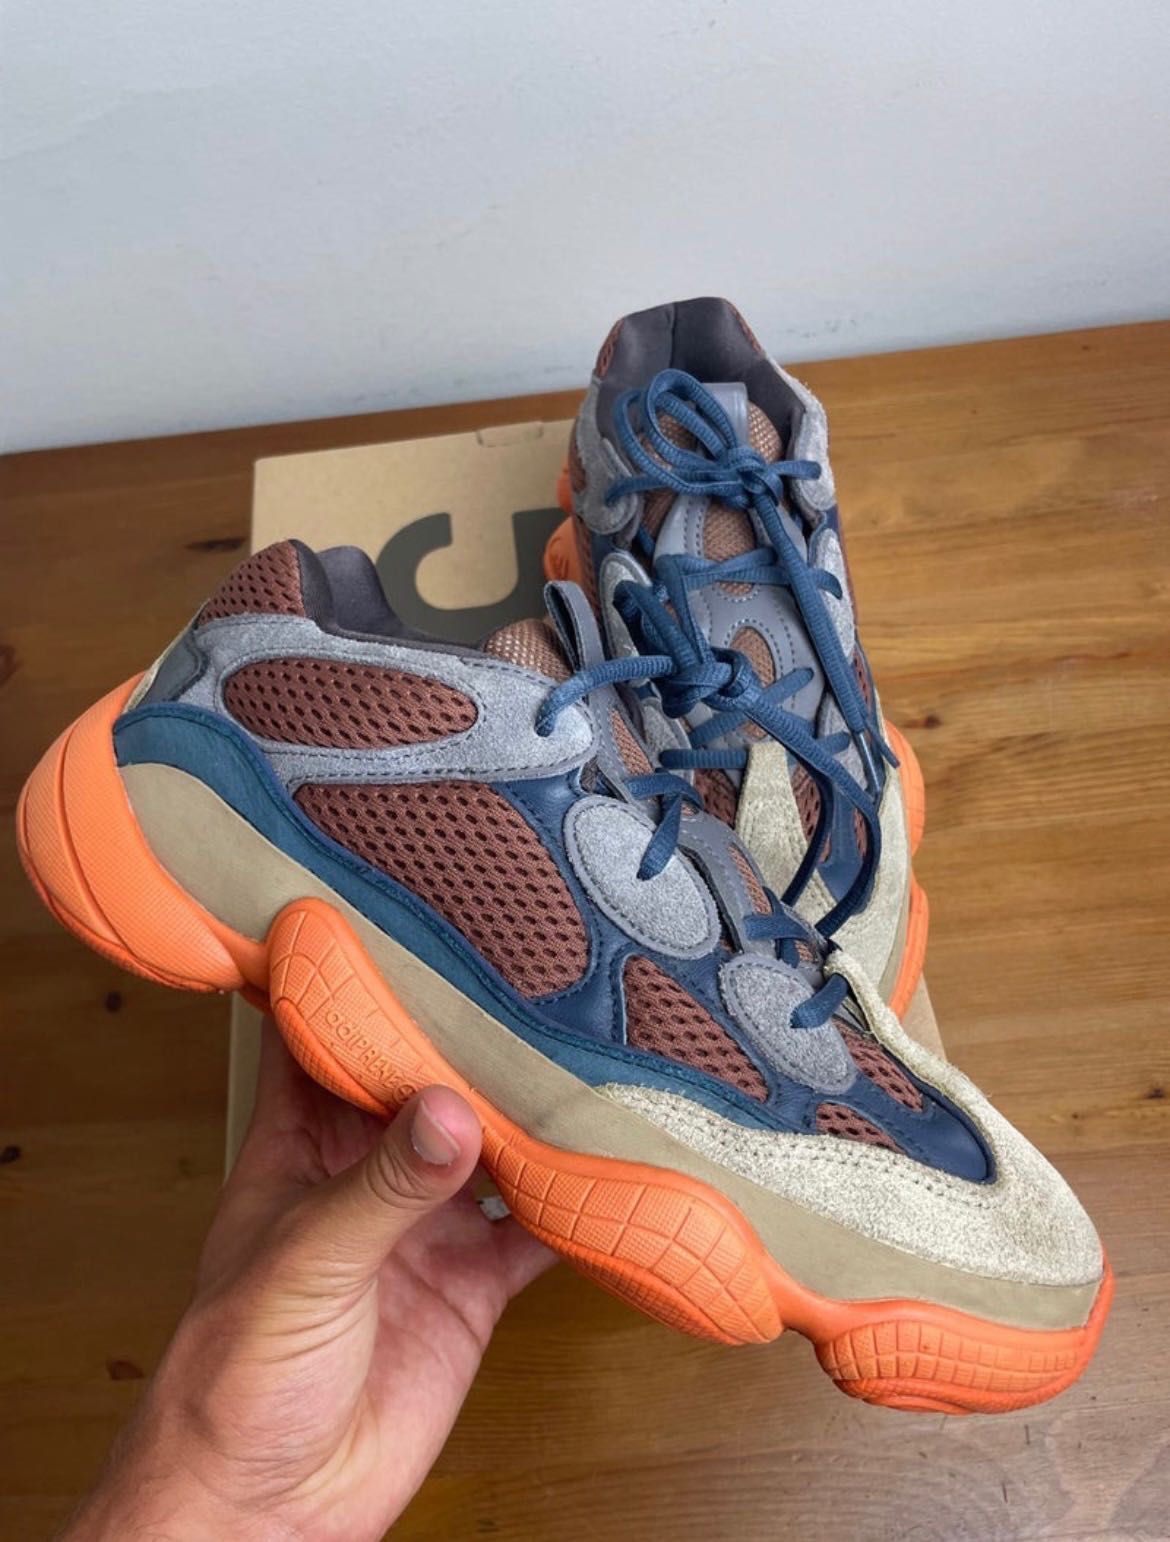 Yeezy Boost 500 "enflame"